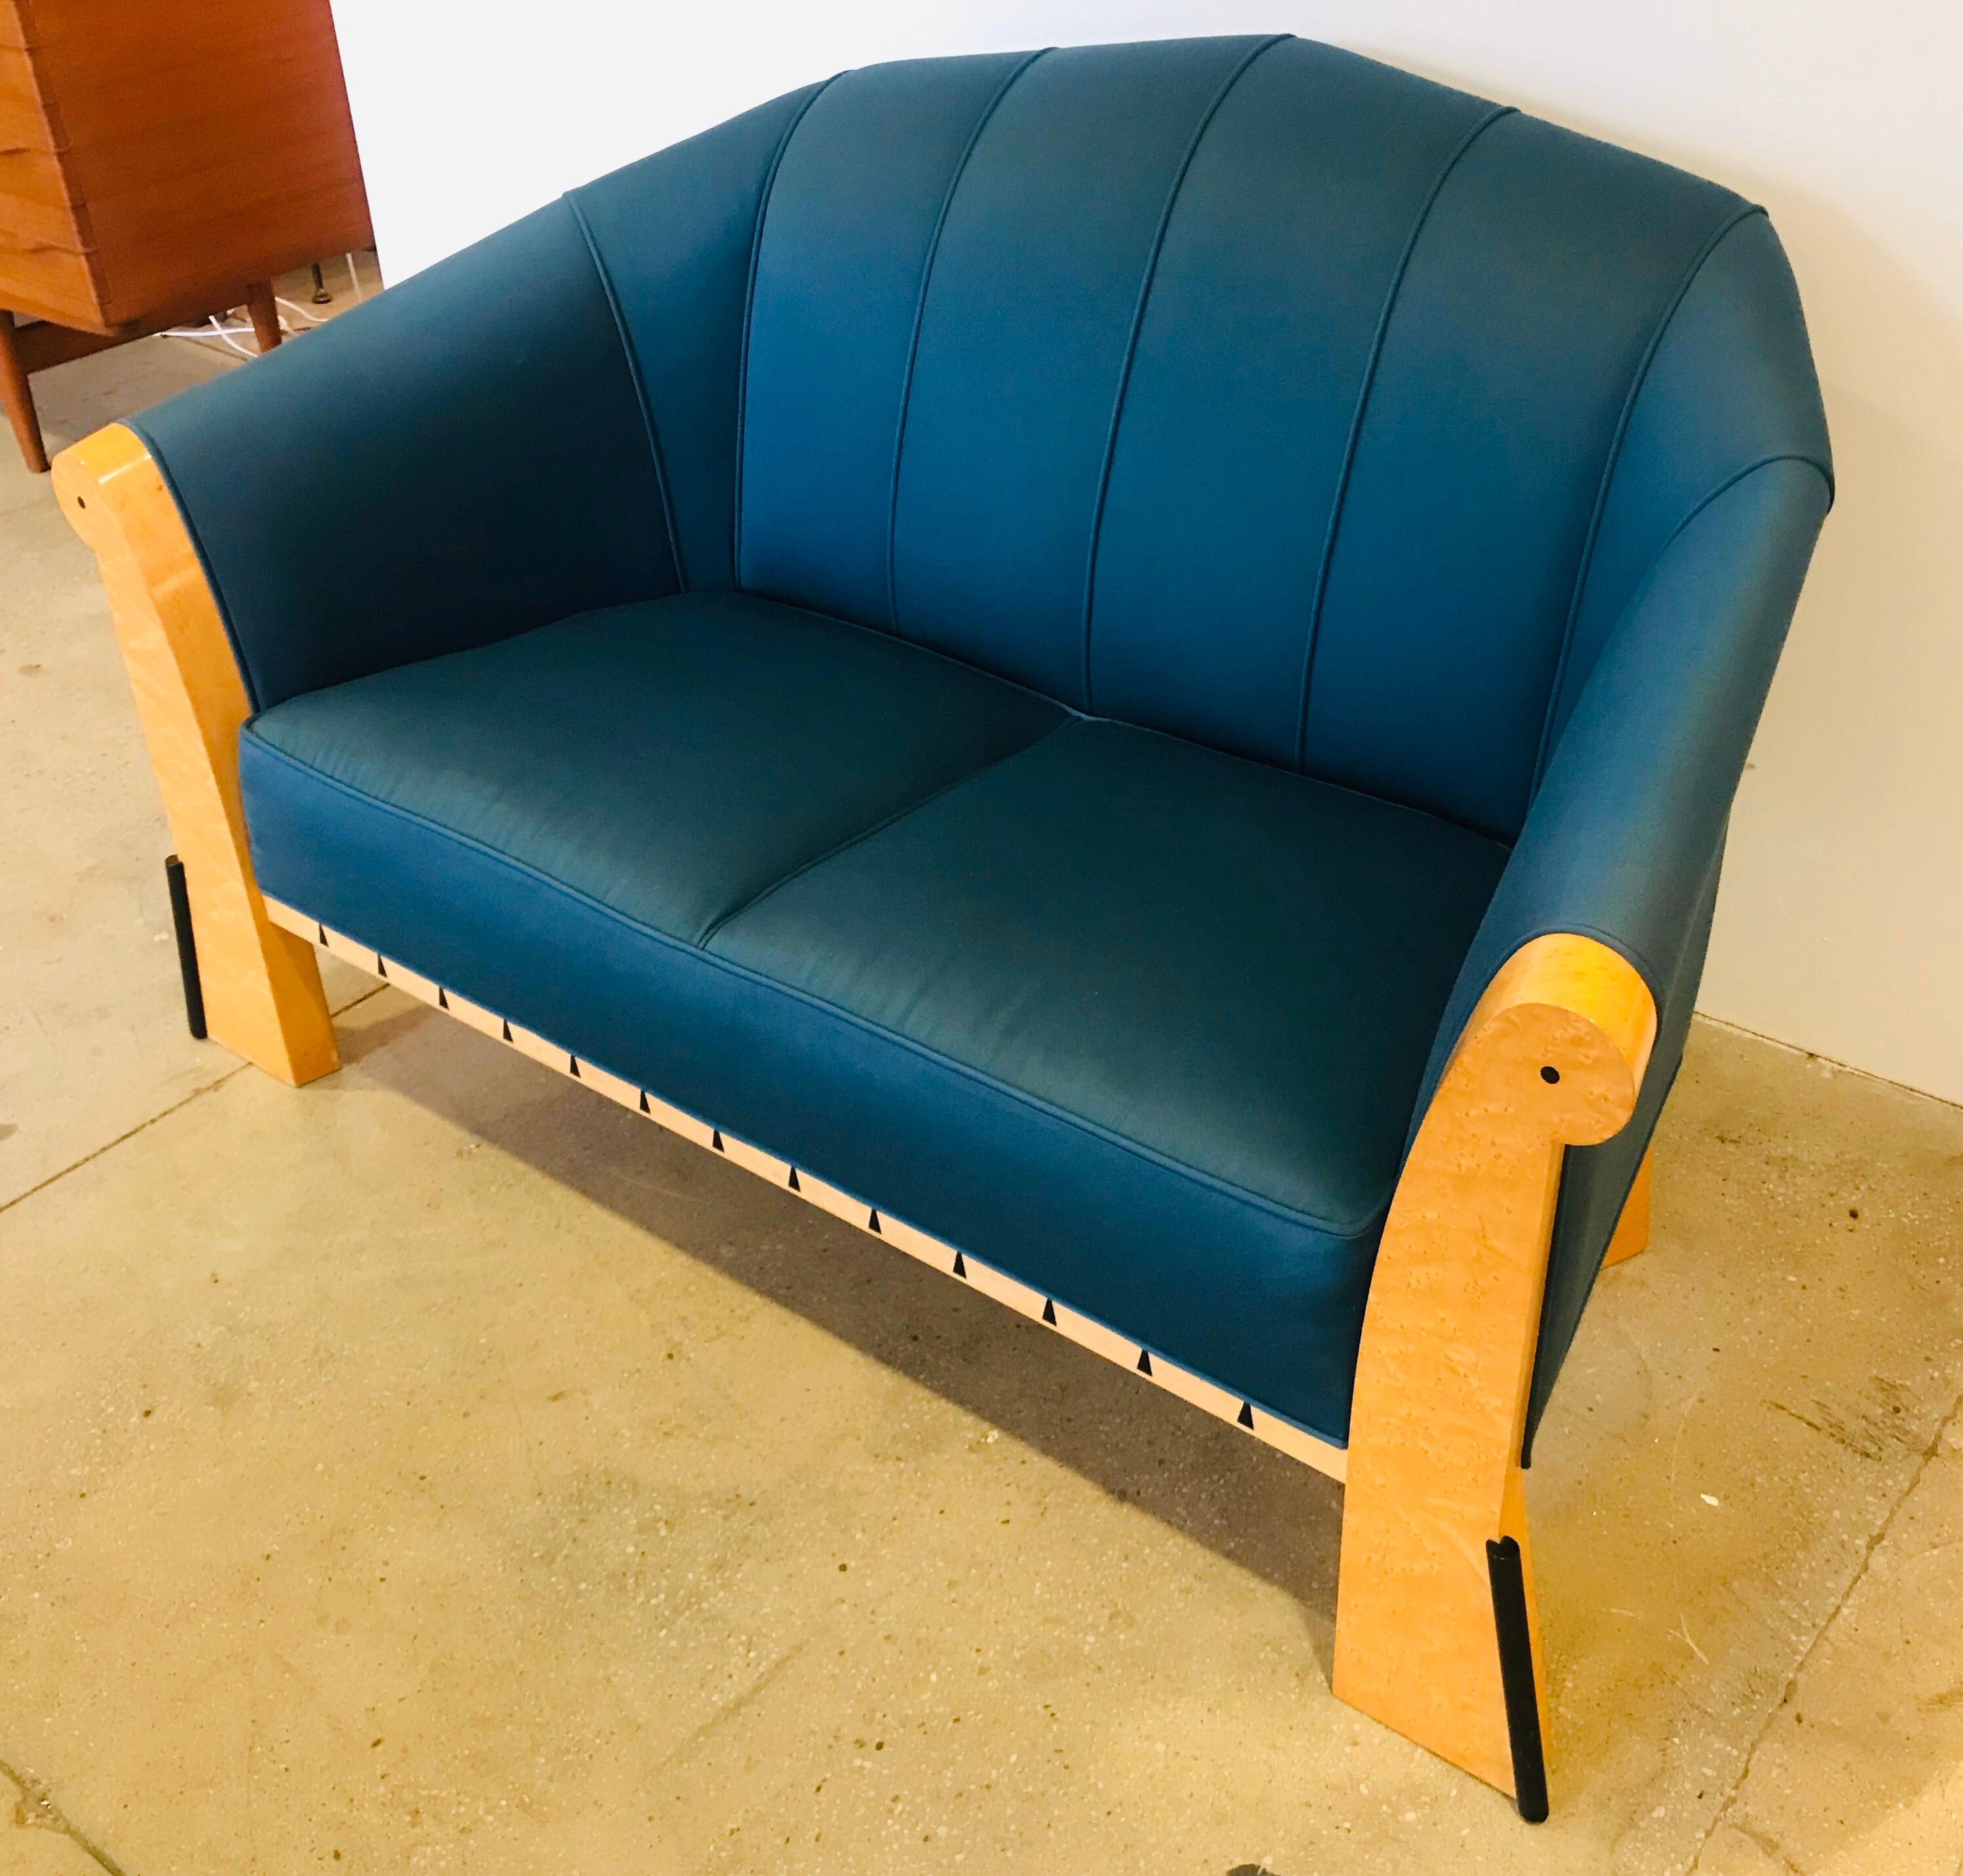 An iconic and rare 1980s sofa by American designer, Michael Graves. Faceted vibrant peacock blue upholstered back with ebony inlays in the bird's-eye maple frame.

Michael Graves (born 1934) was a leading American architect and designer,